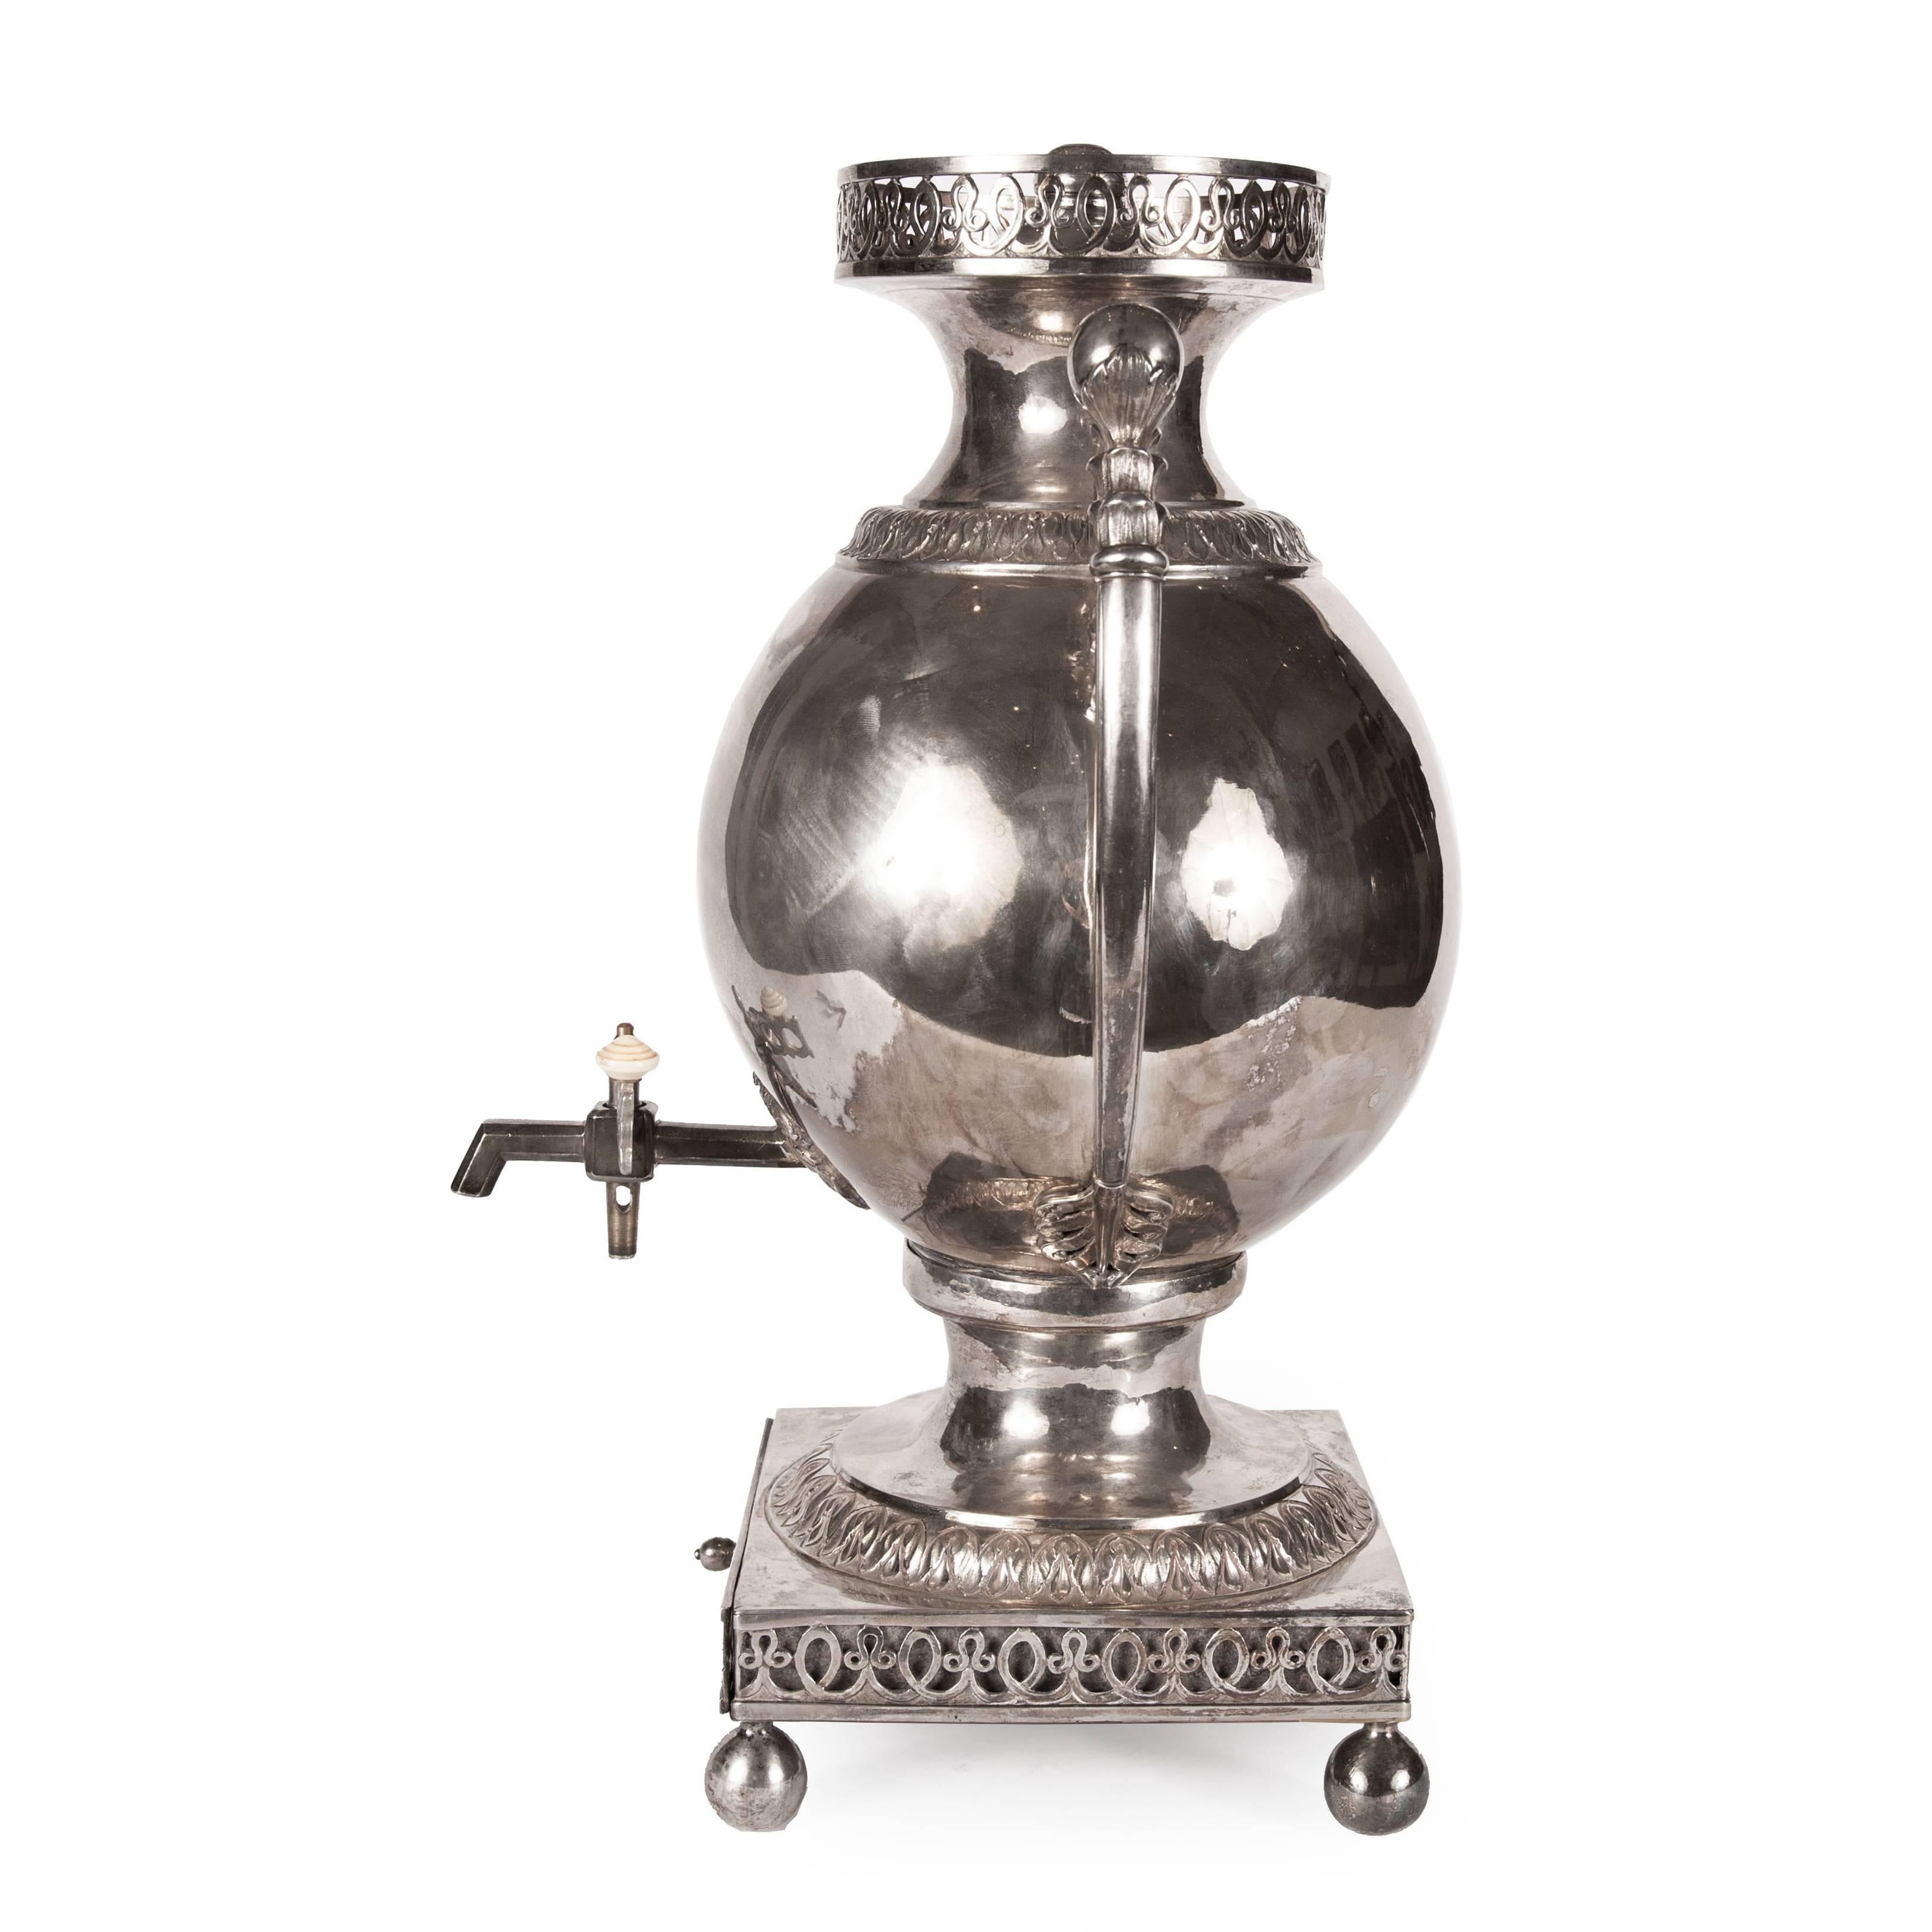 This stunning Russian samovar was cast in solid silver in the 18th Century. The samovar stands on a square base with scrolling motifs and four ball feet. The body of the samovar is ovoid and features a dispensing tap to the lower section and twin